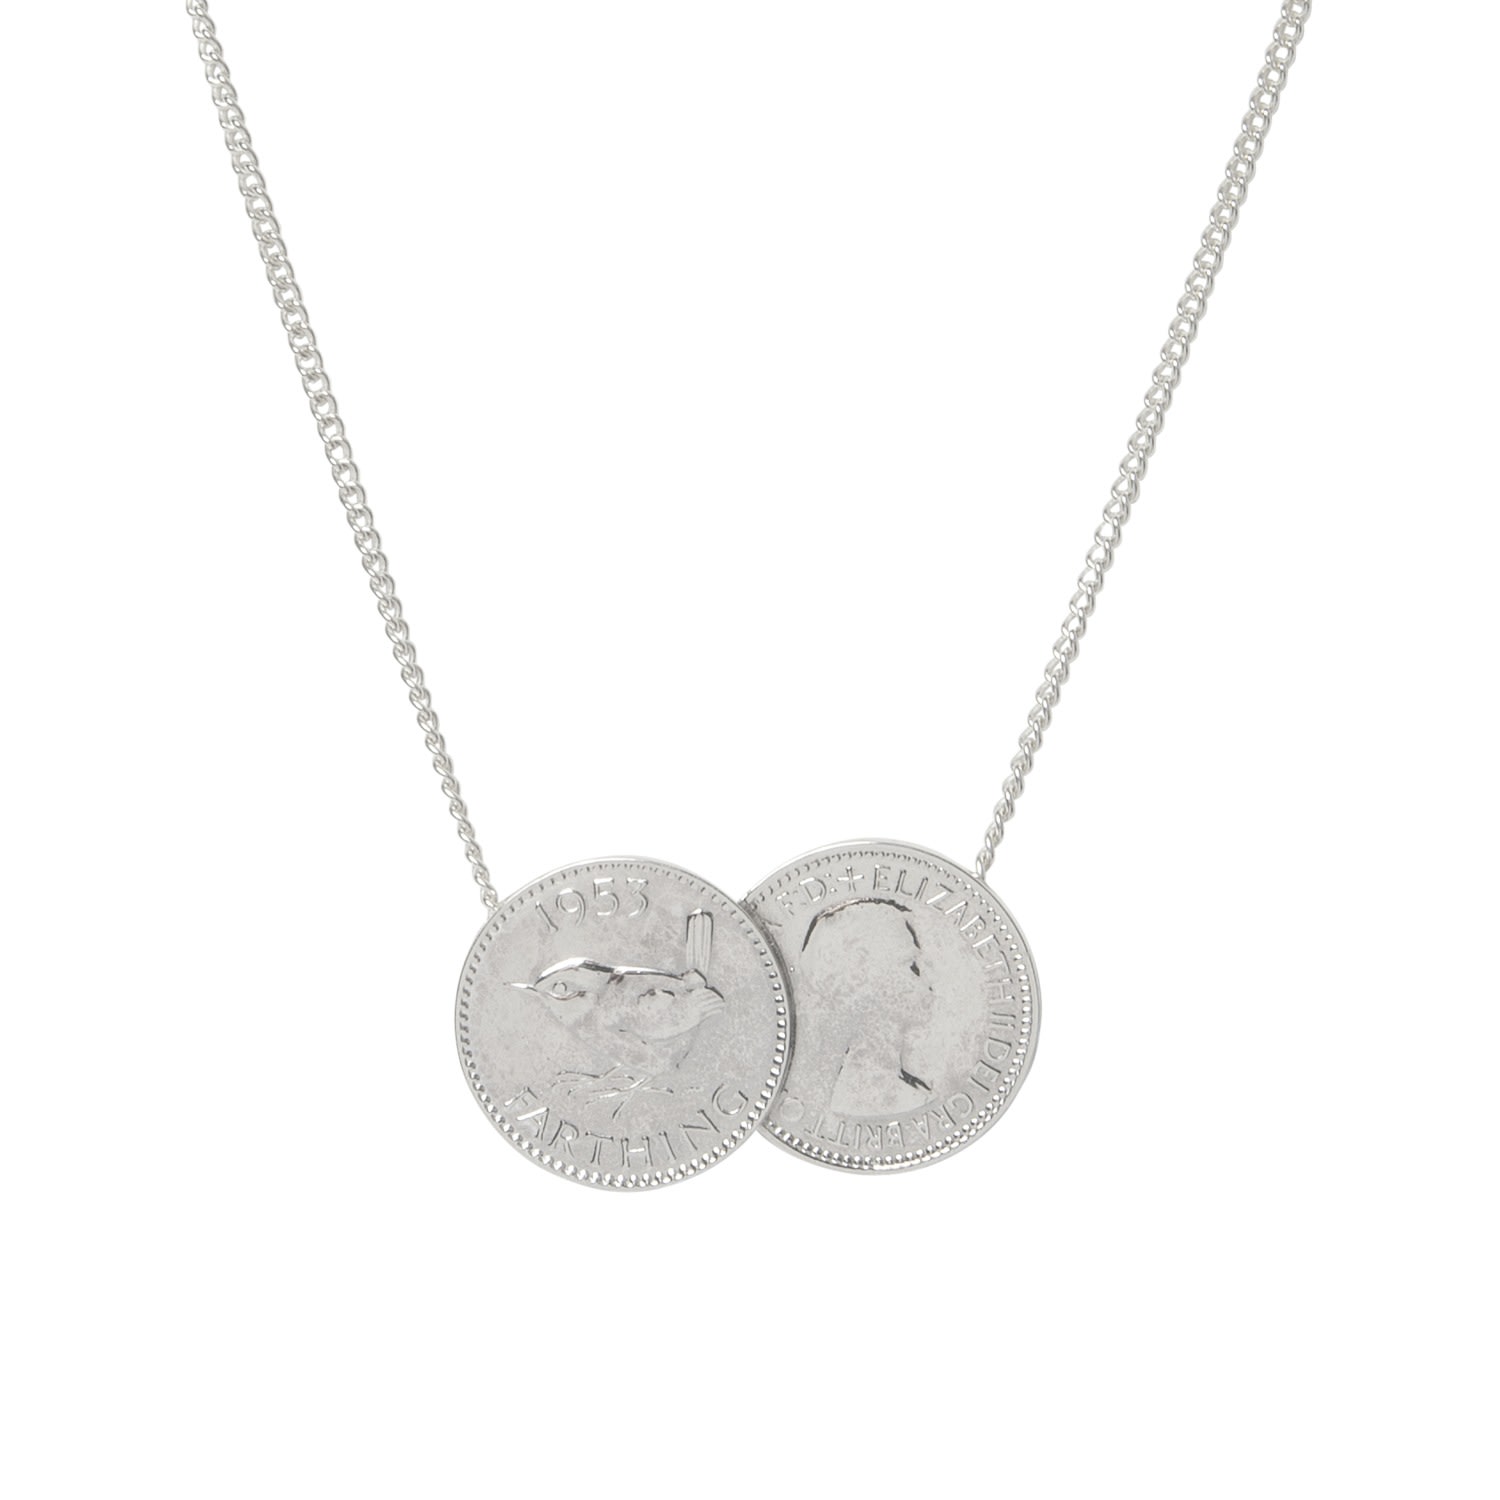 Women’s English Farthing Double Coin Pendant Silver Necklace Katie Mullally